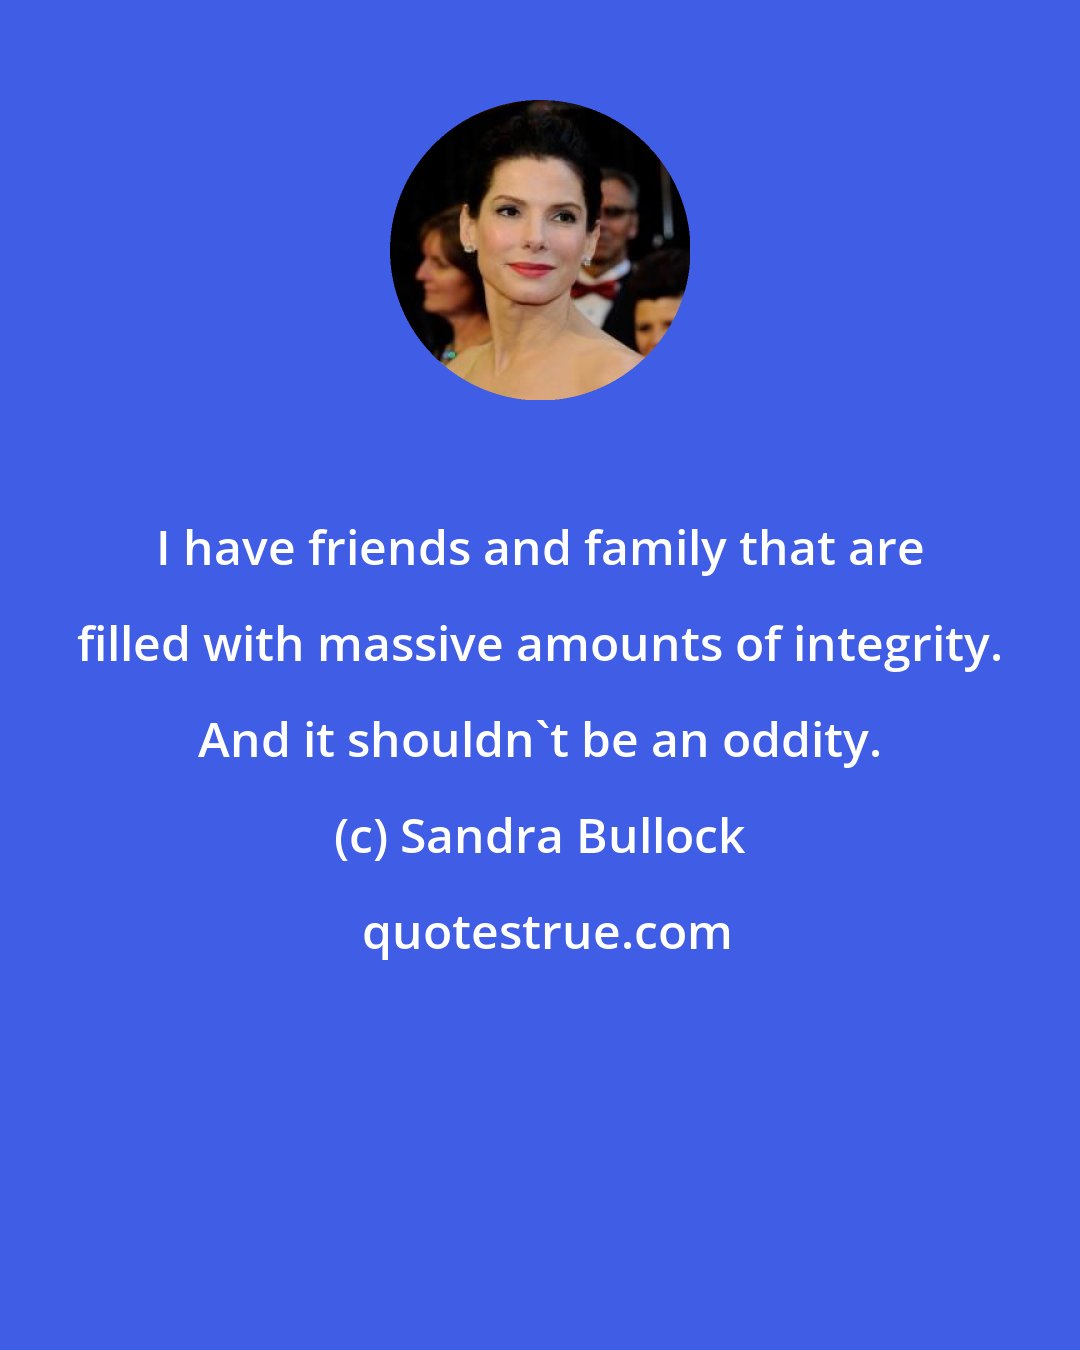 Sandra Bullock: I have friends and family that are filled with massive amounts of integrity. And it shouldn't be an oddity.